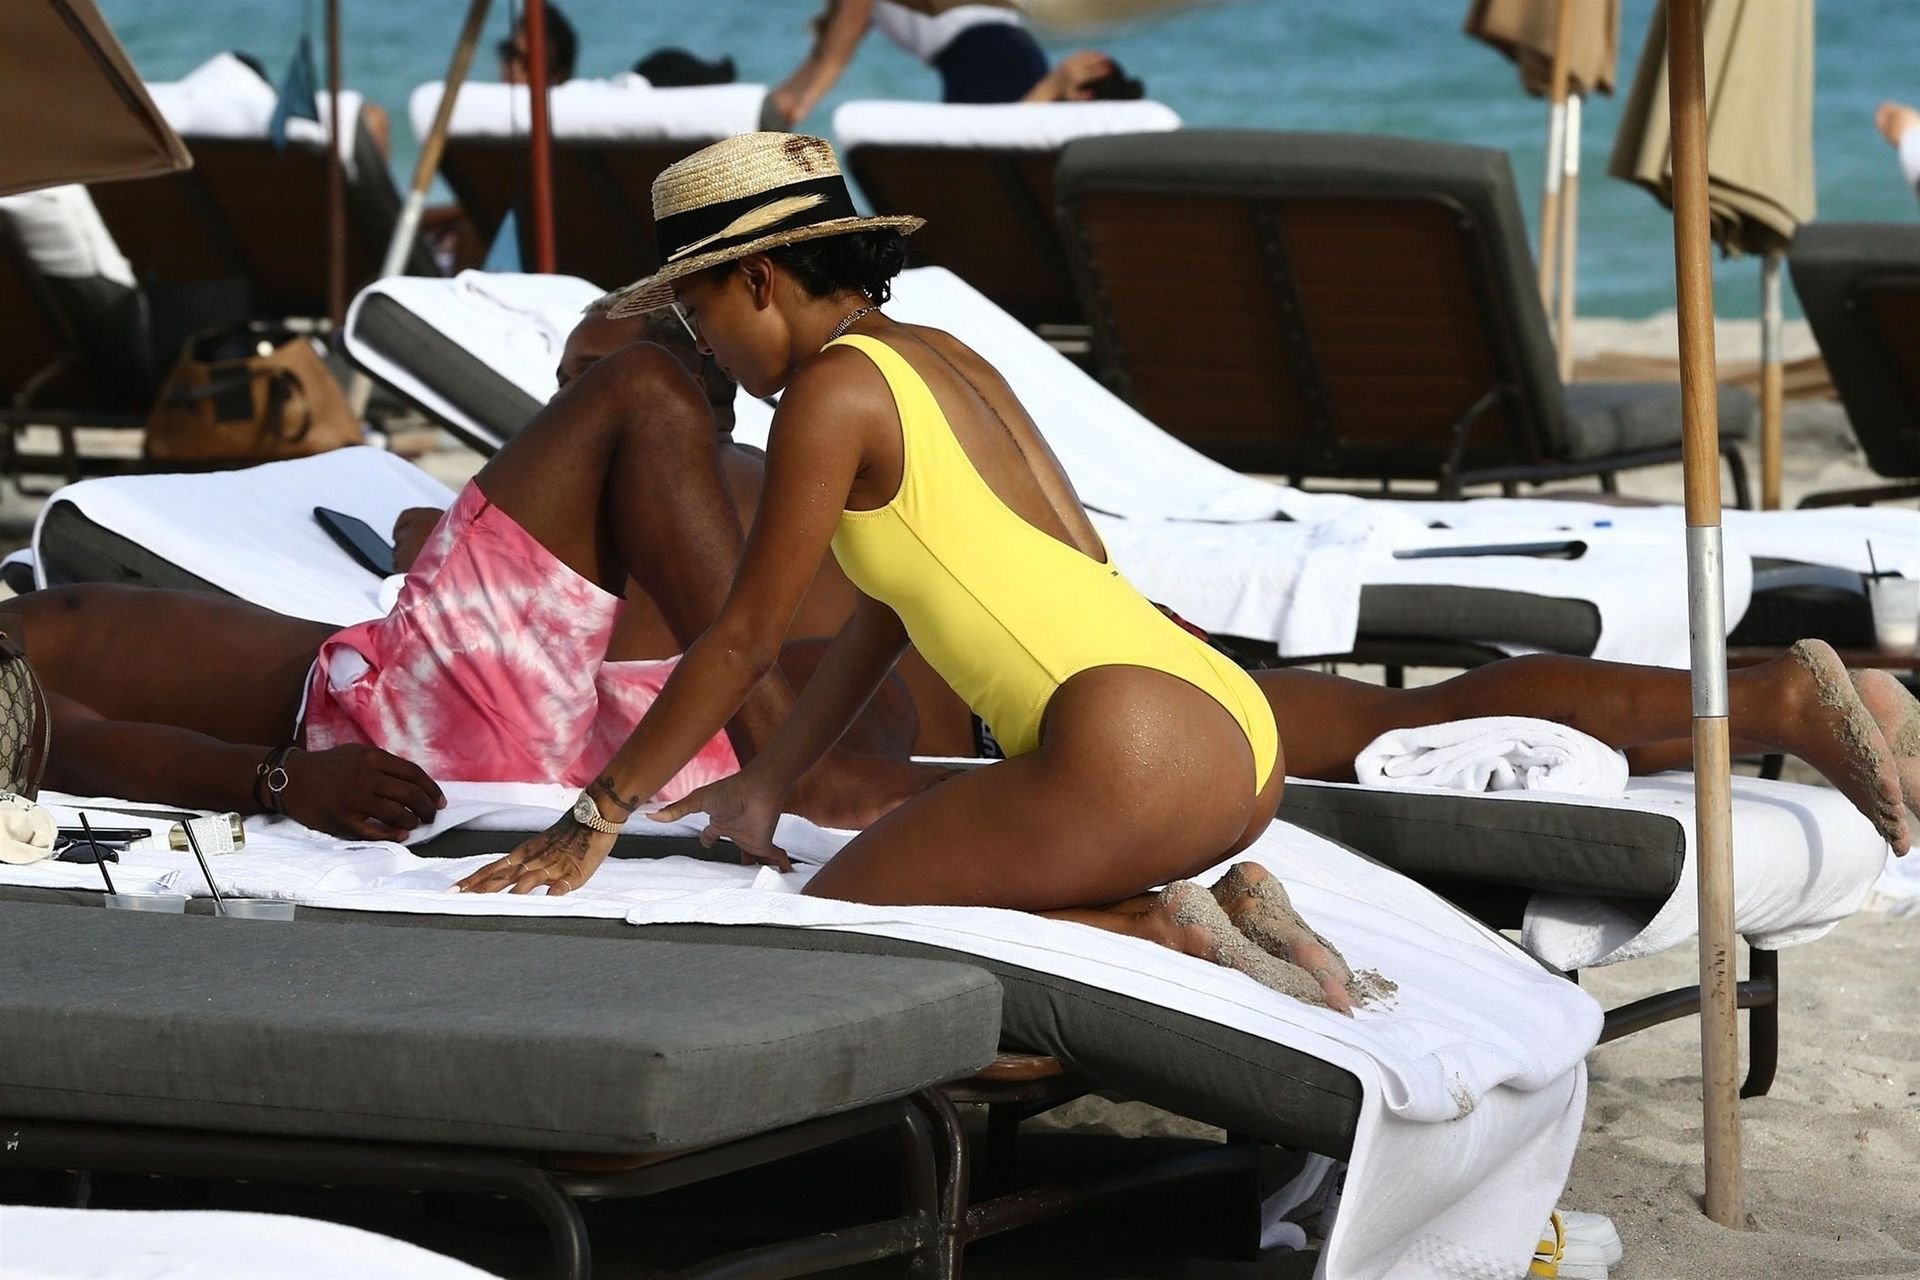 Karrueche Tran shows off her curves in a bright yellow swimsuit during a be...